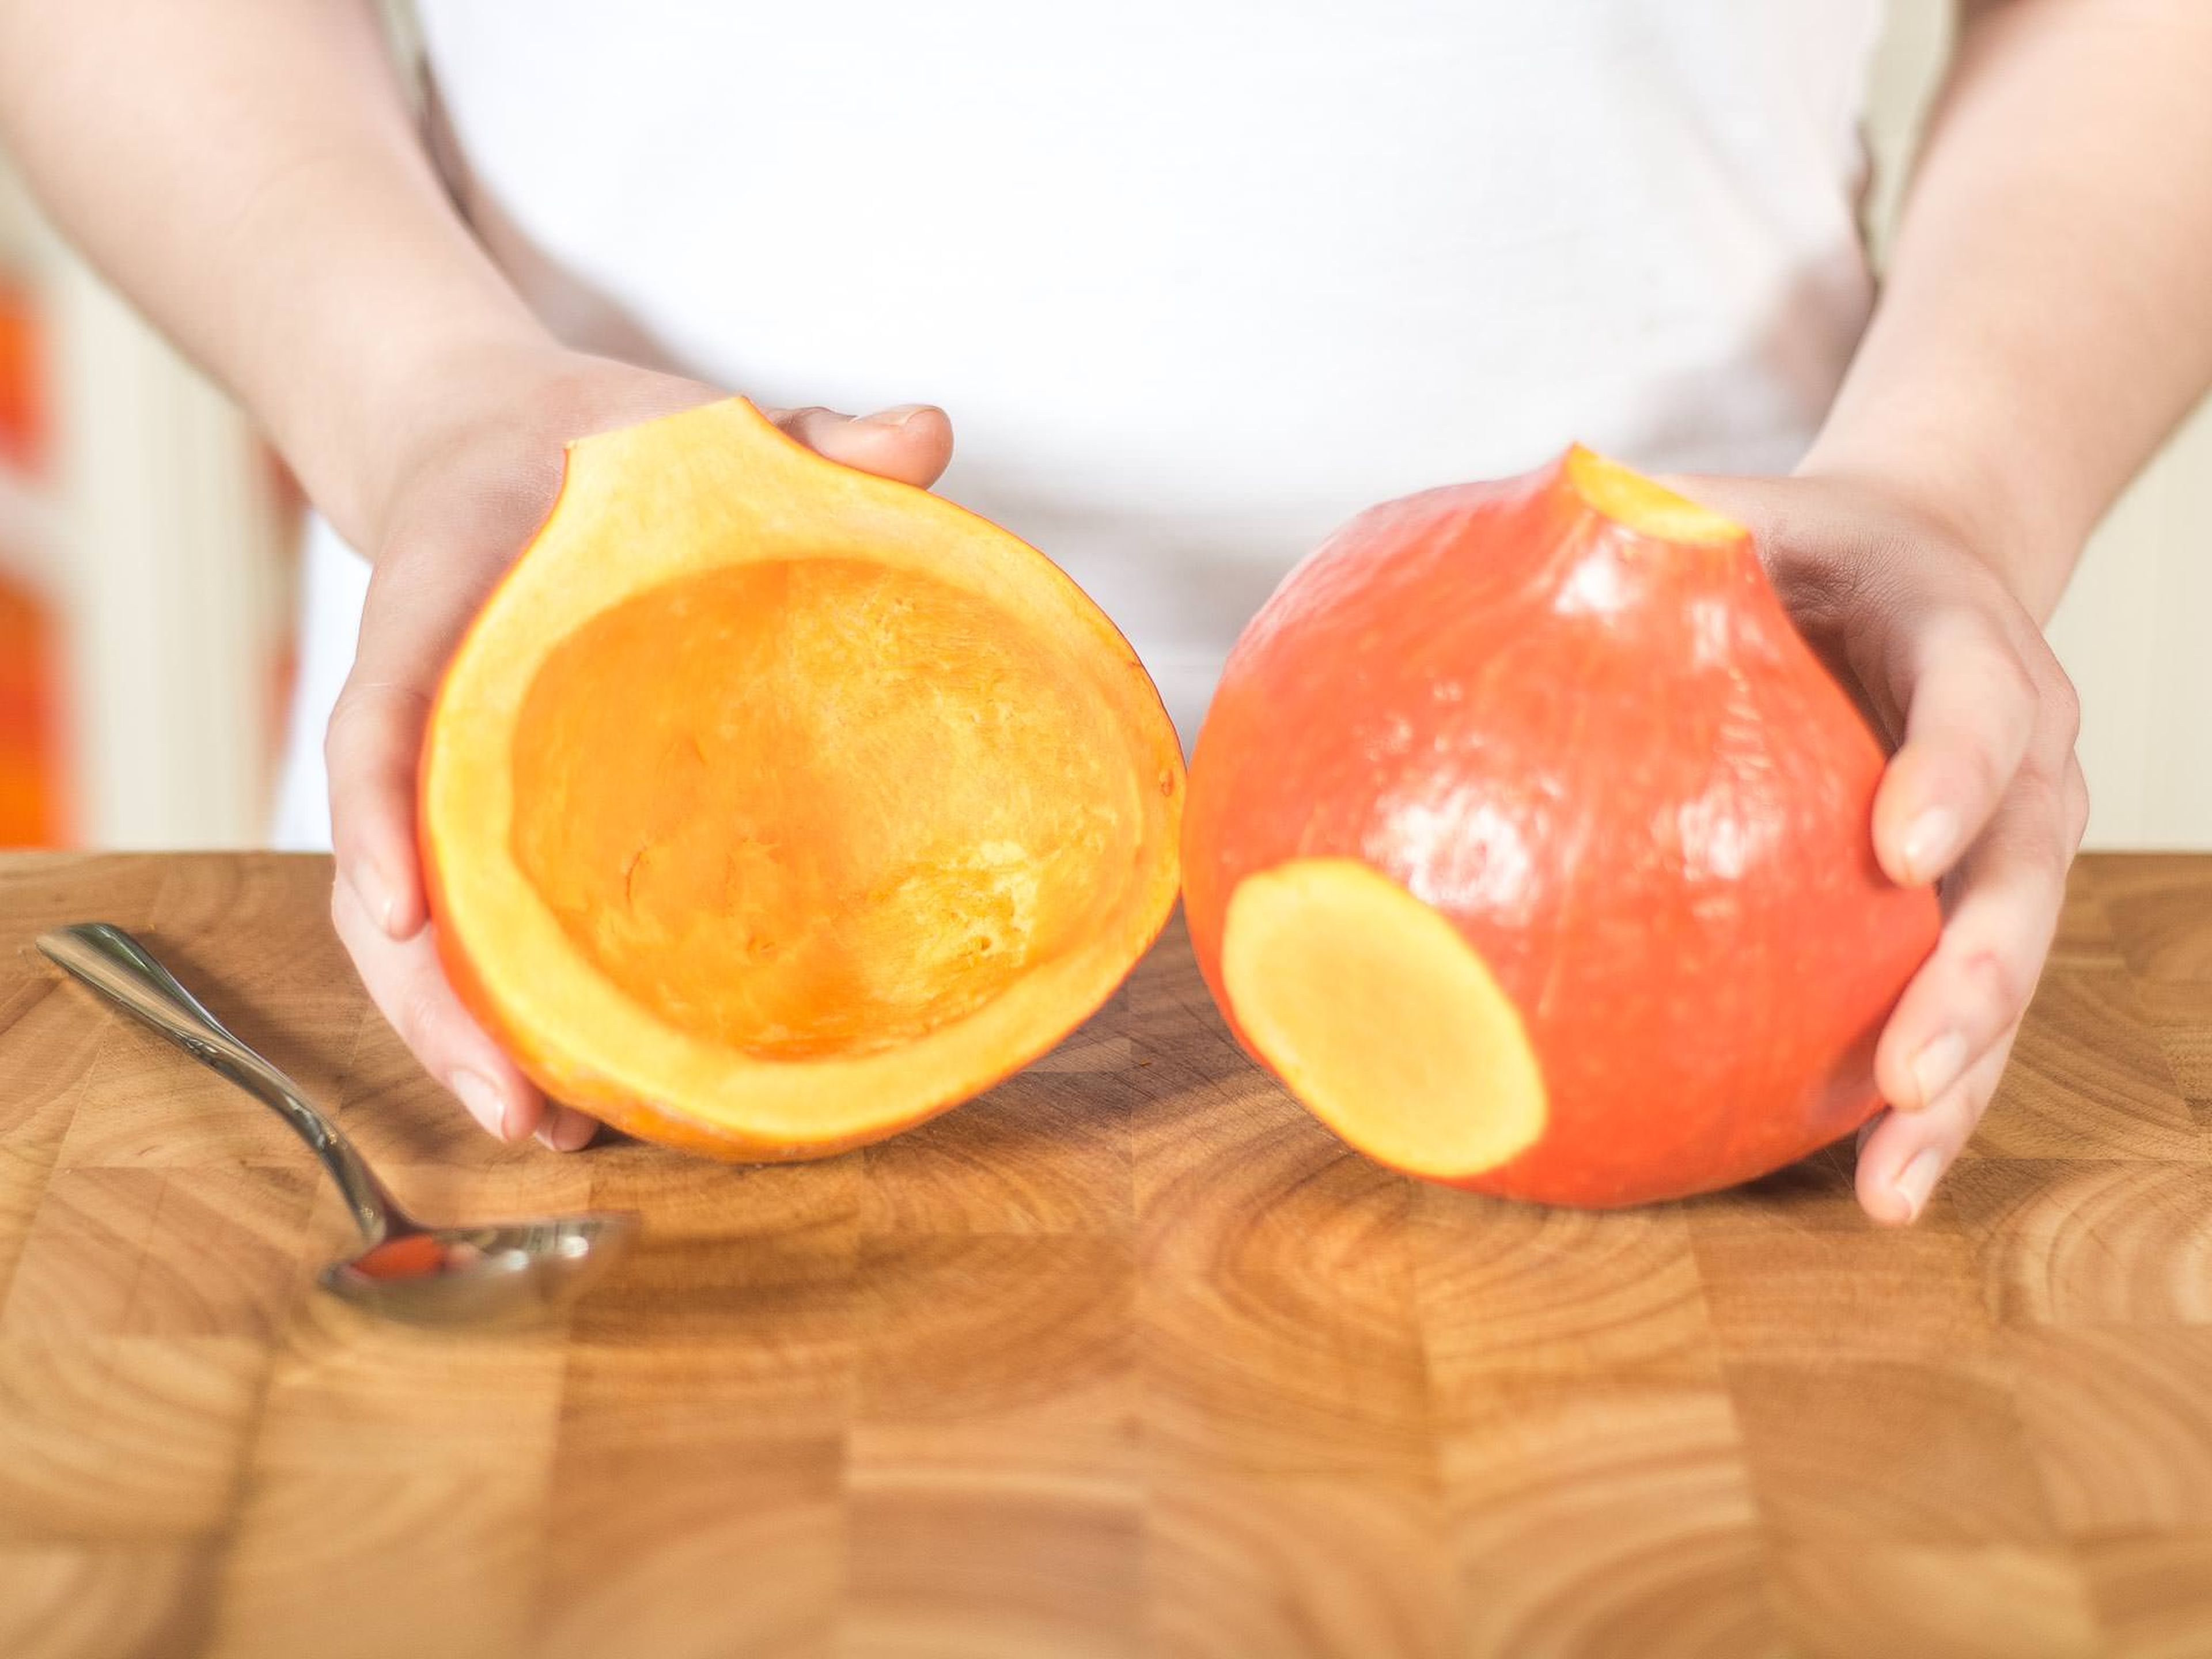 Optionally, you can serve the risotto in a hollowed out pumpkin. To do so, create a little base by cutting a piece of the hokkaido pumpkin from the widest side.